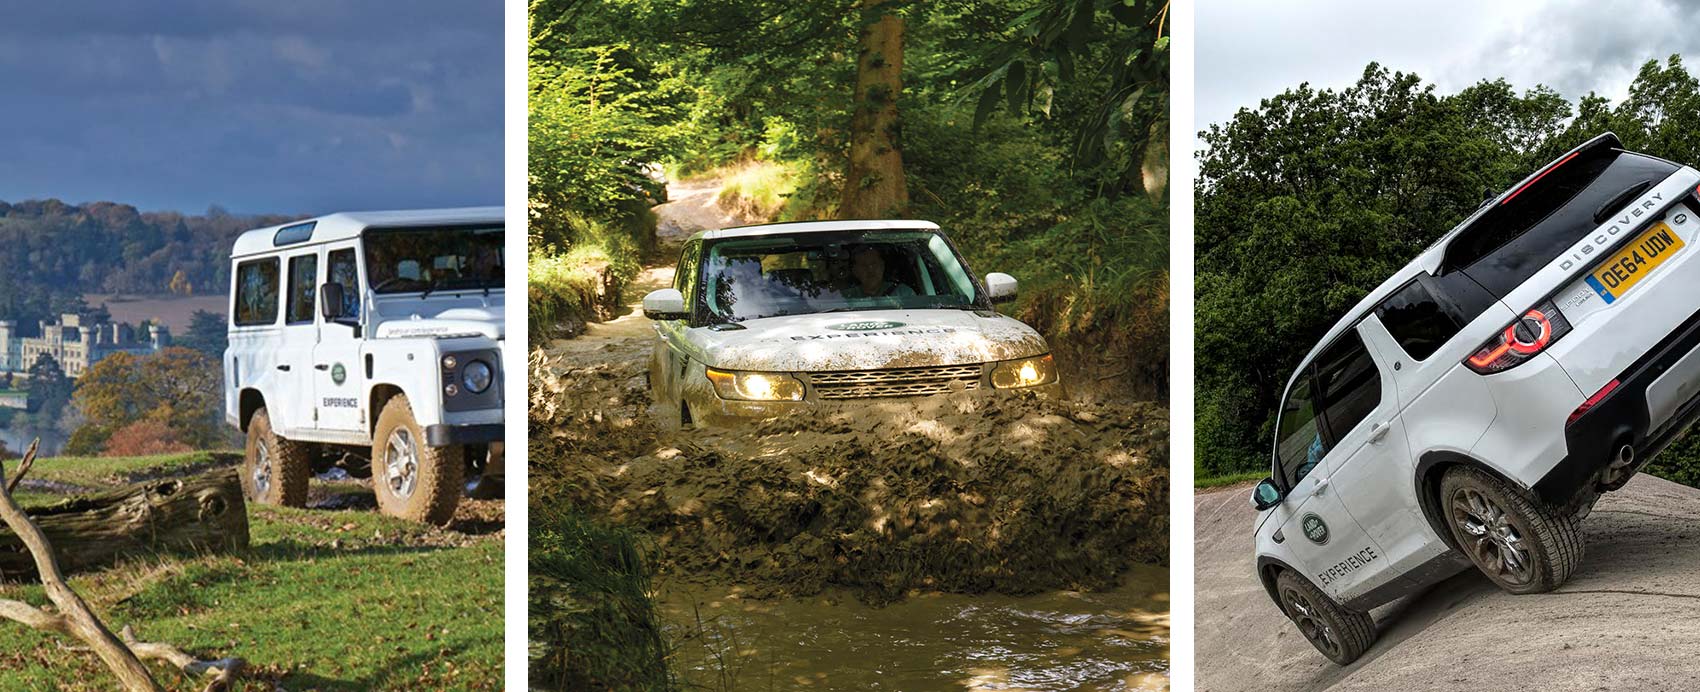 Re-ignite the explorer in you on the world?s most historic and challenging Land Rover off road trails